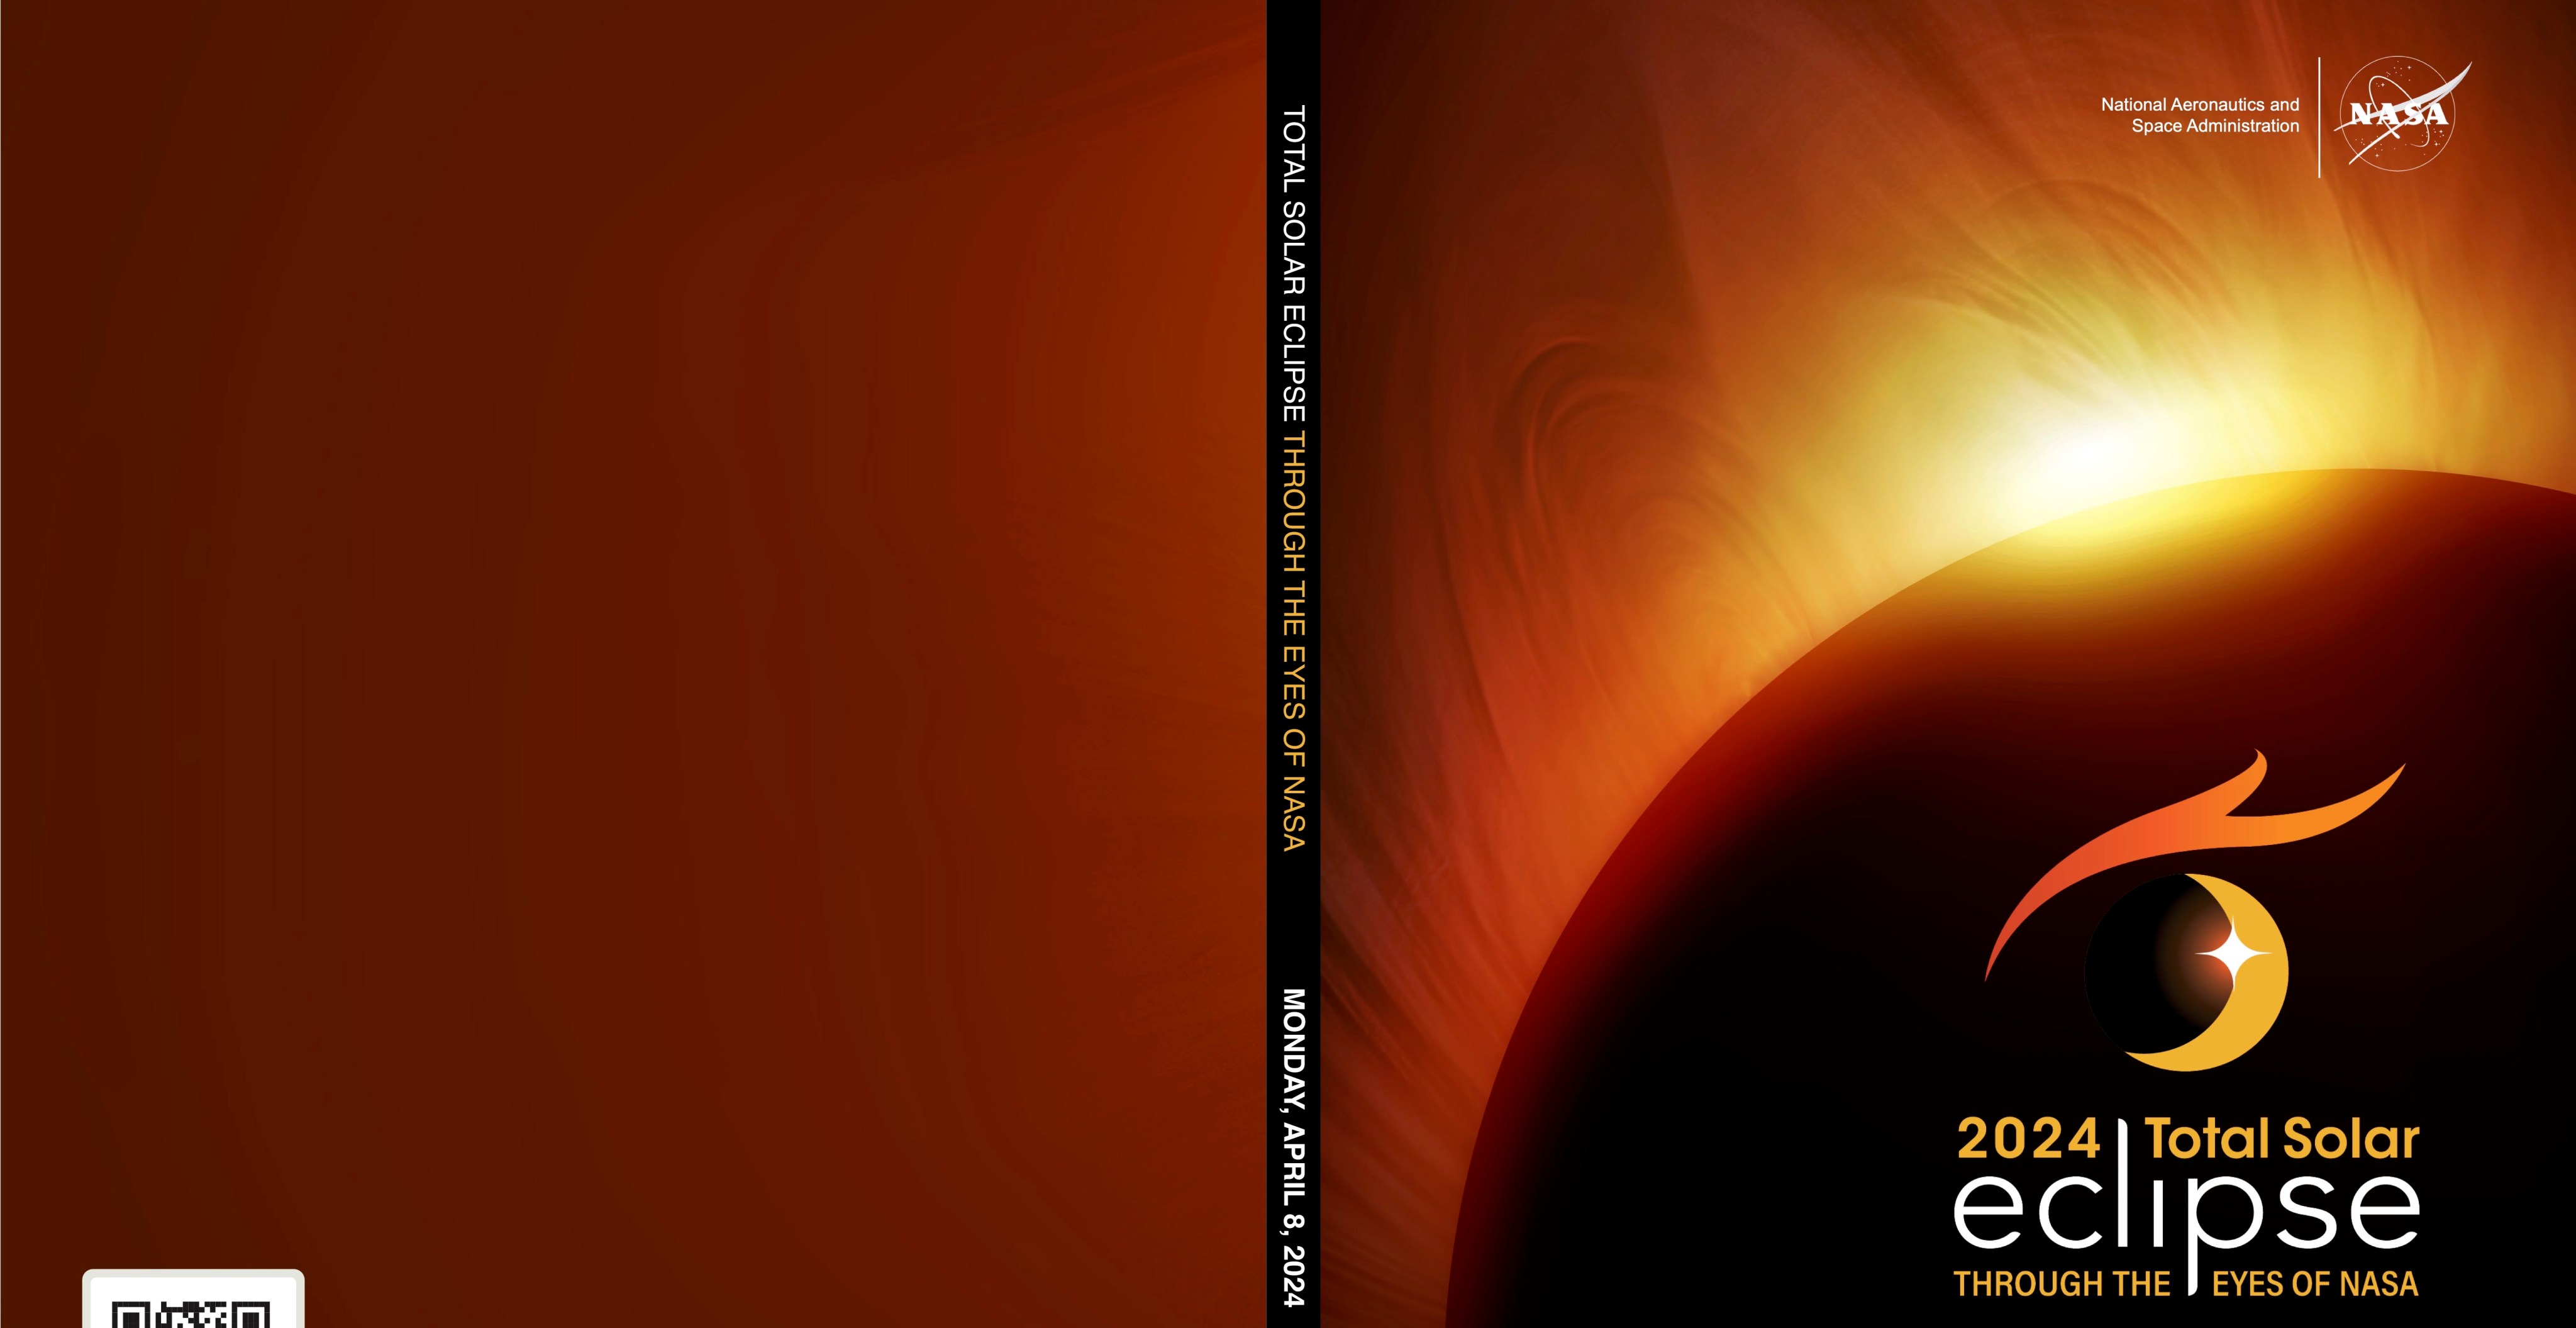 The total solar eclipse folder, which is a dark red and orange. On the right, is the eclipse identifier, which reads "2024 Total Solar Eclipse Through the Eyes of NASA" on top of an illustration of an eclipse.